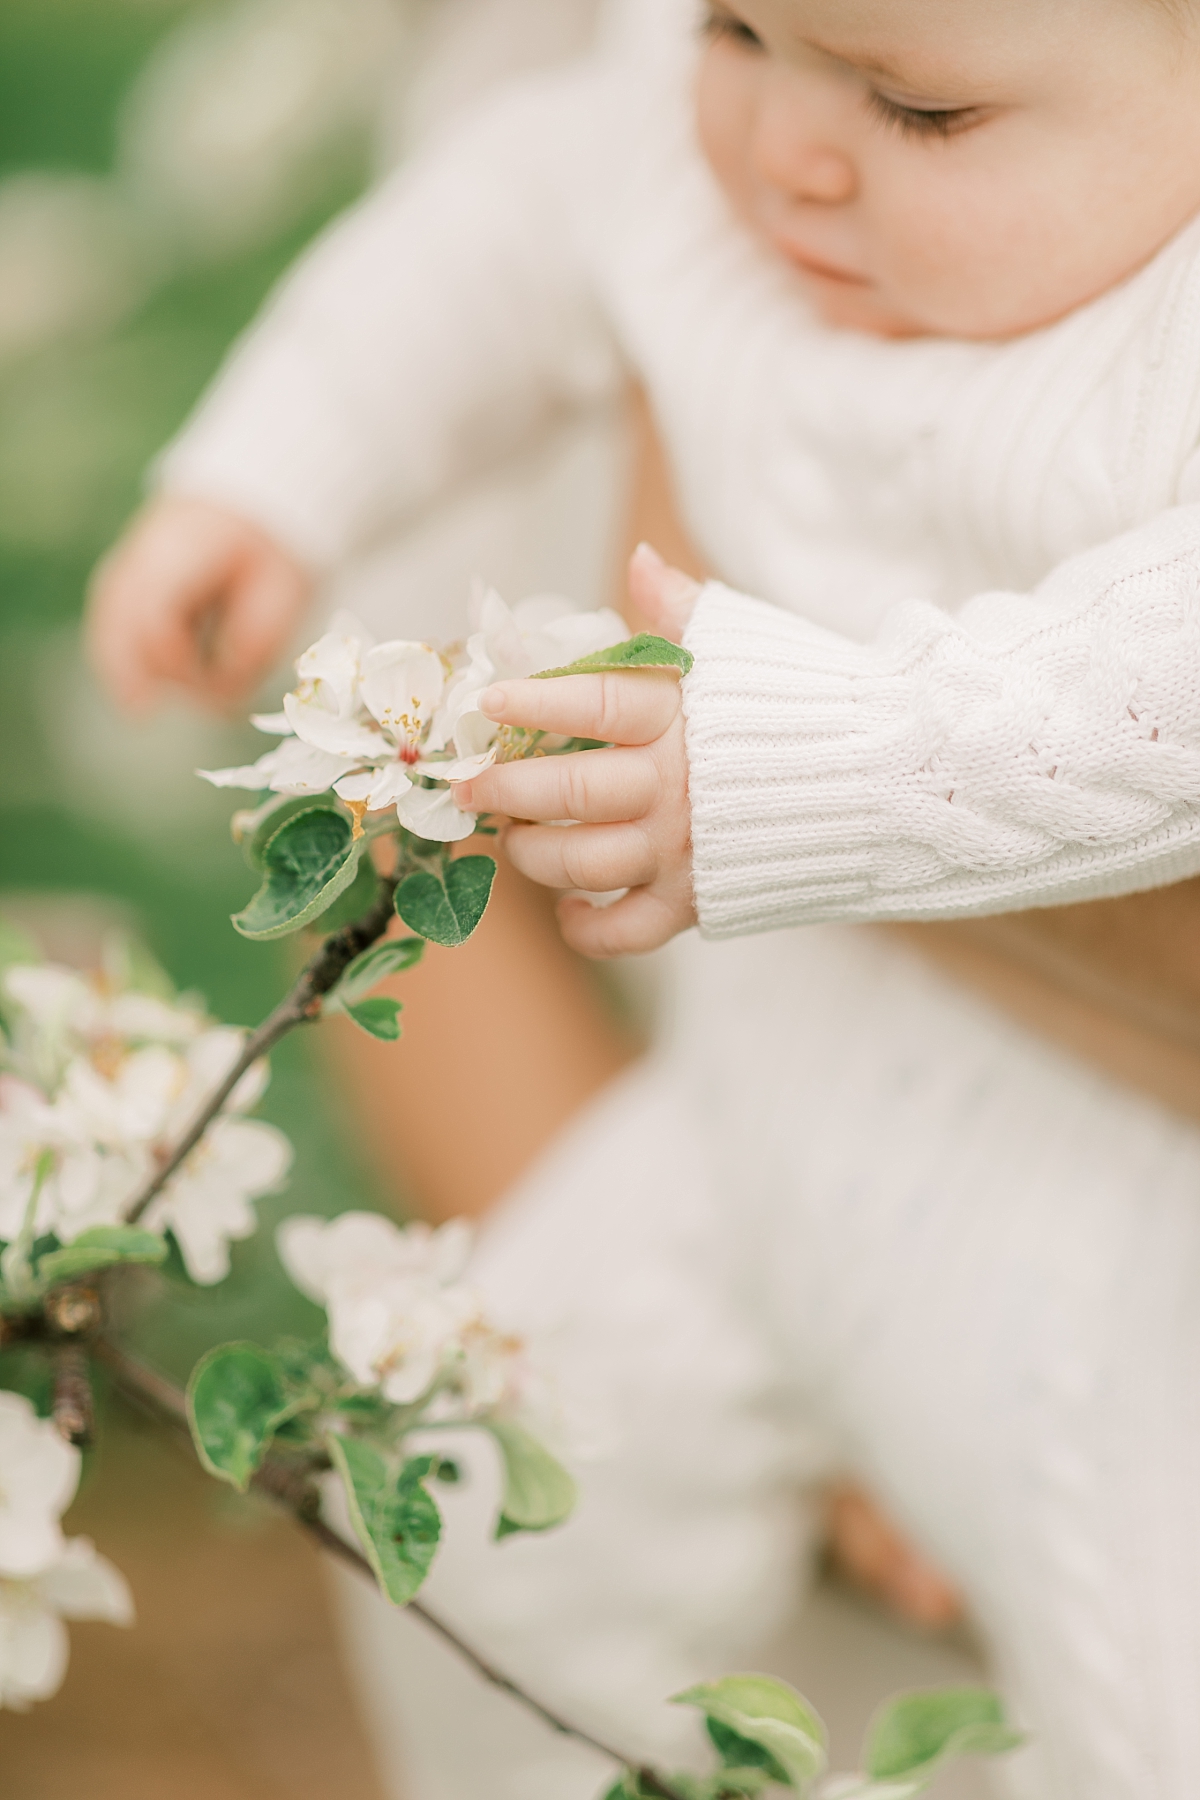 orchard newborn session with baby touching flowers